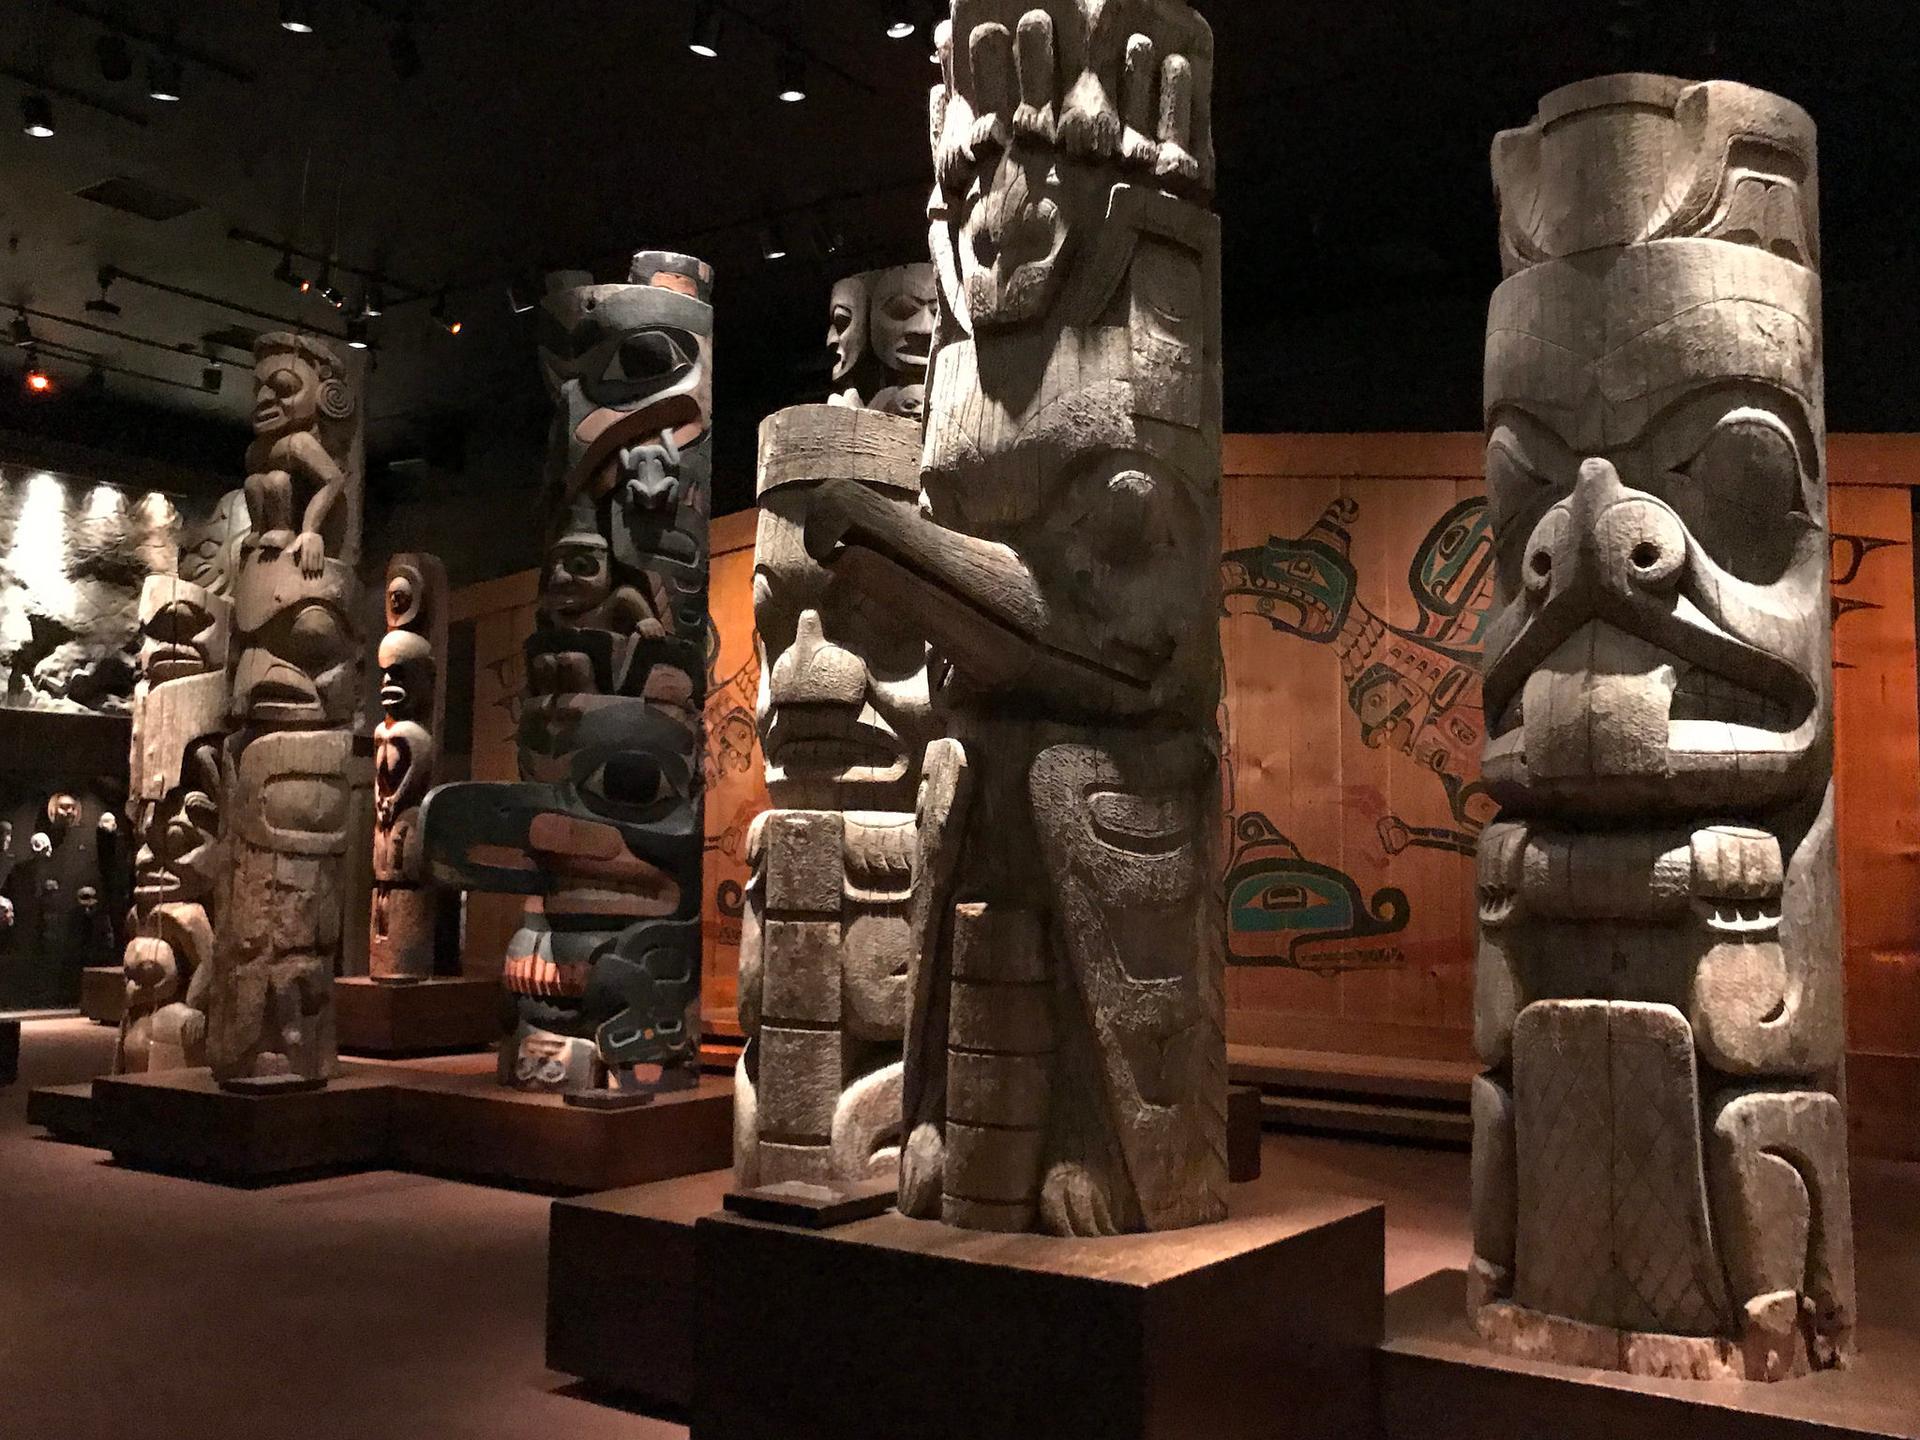 The Totem Hall at the Royal BC Museum in Victoria